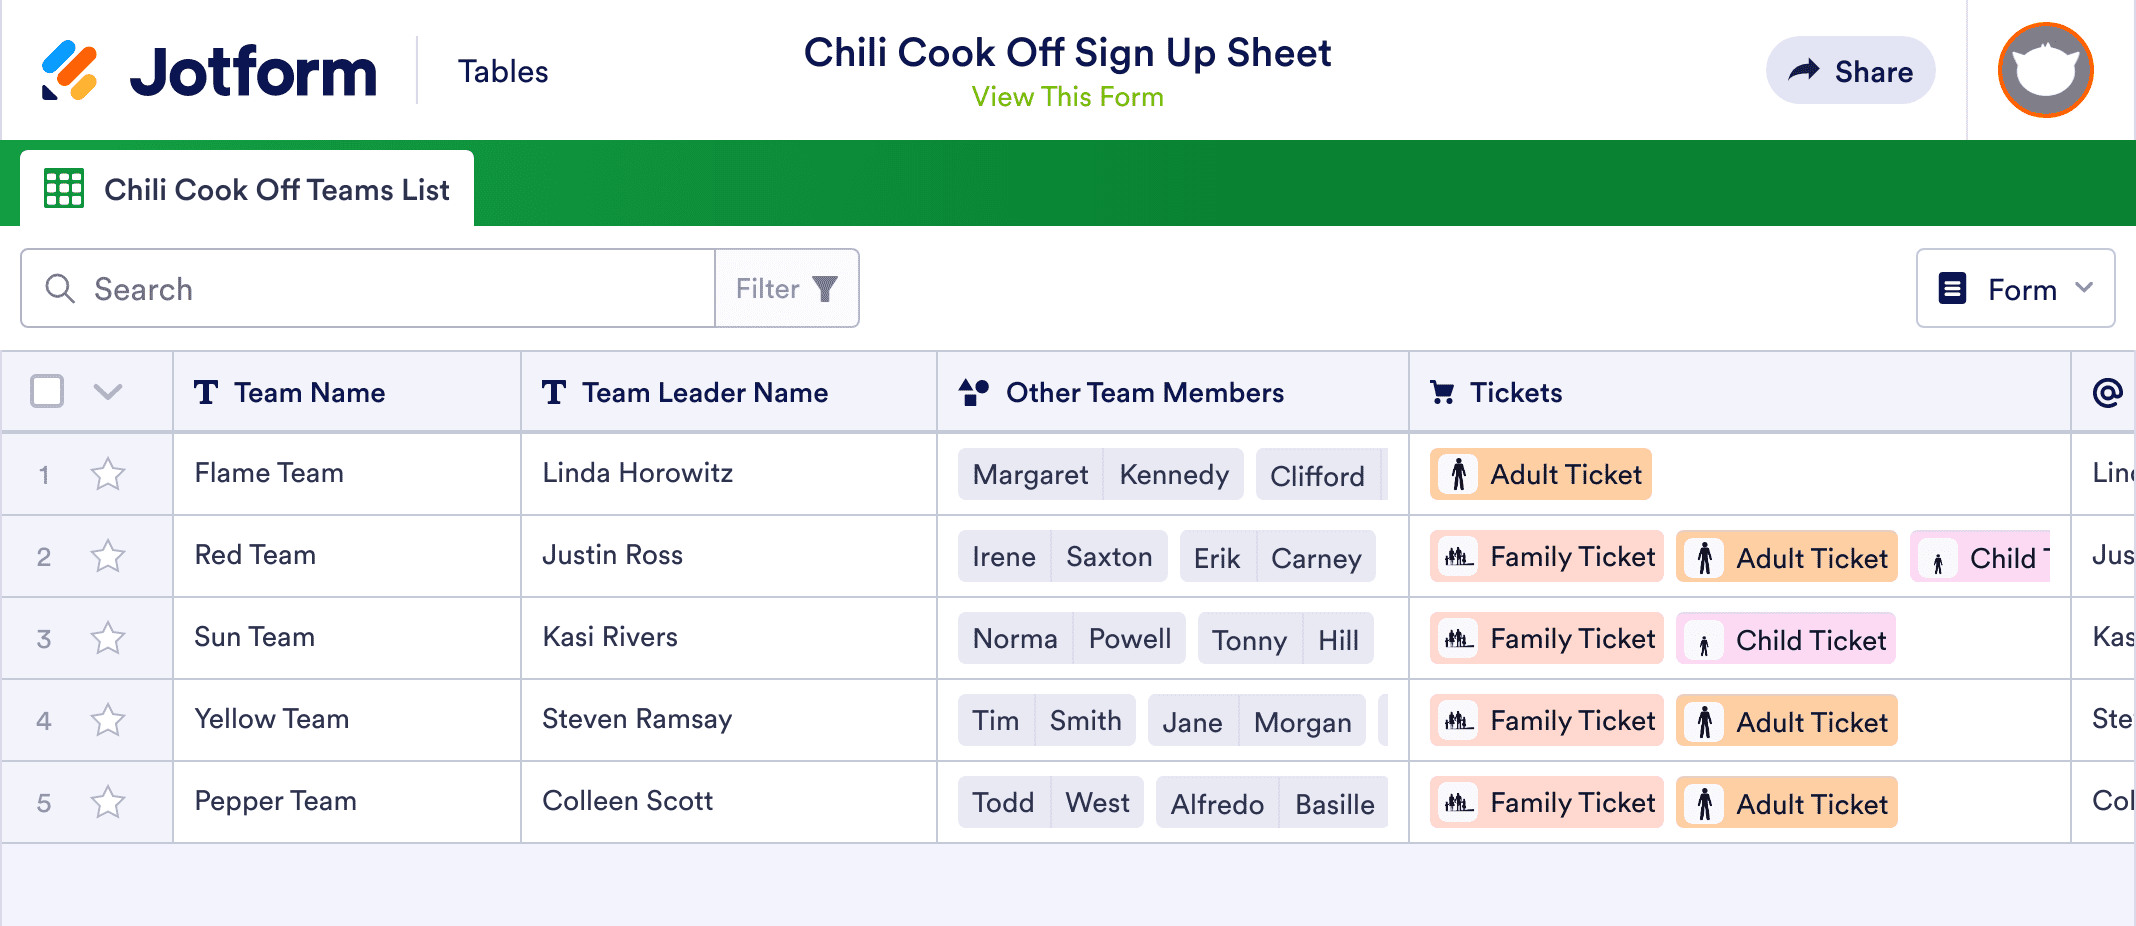 Chili Cook Off Sign Up Sheet